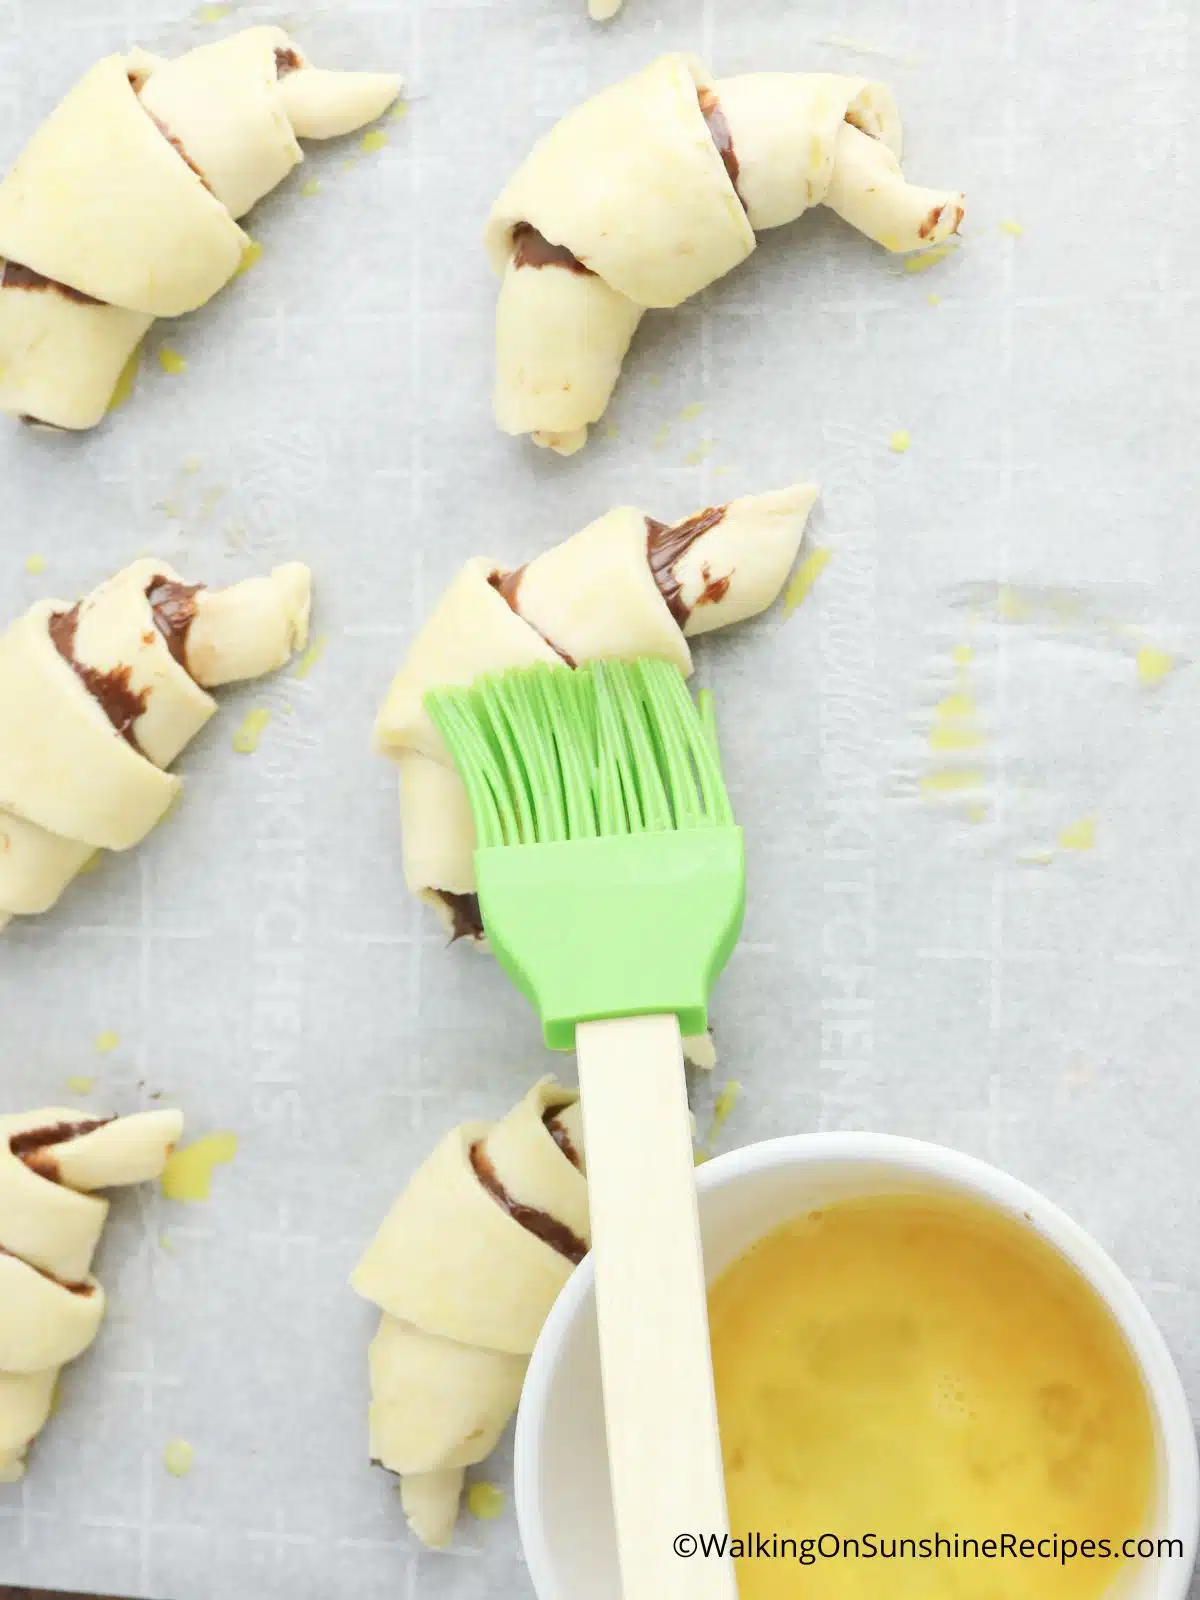 Brush the crescent rolls with beaten egg to make them shine while baking.